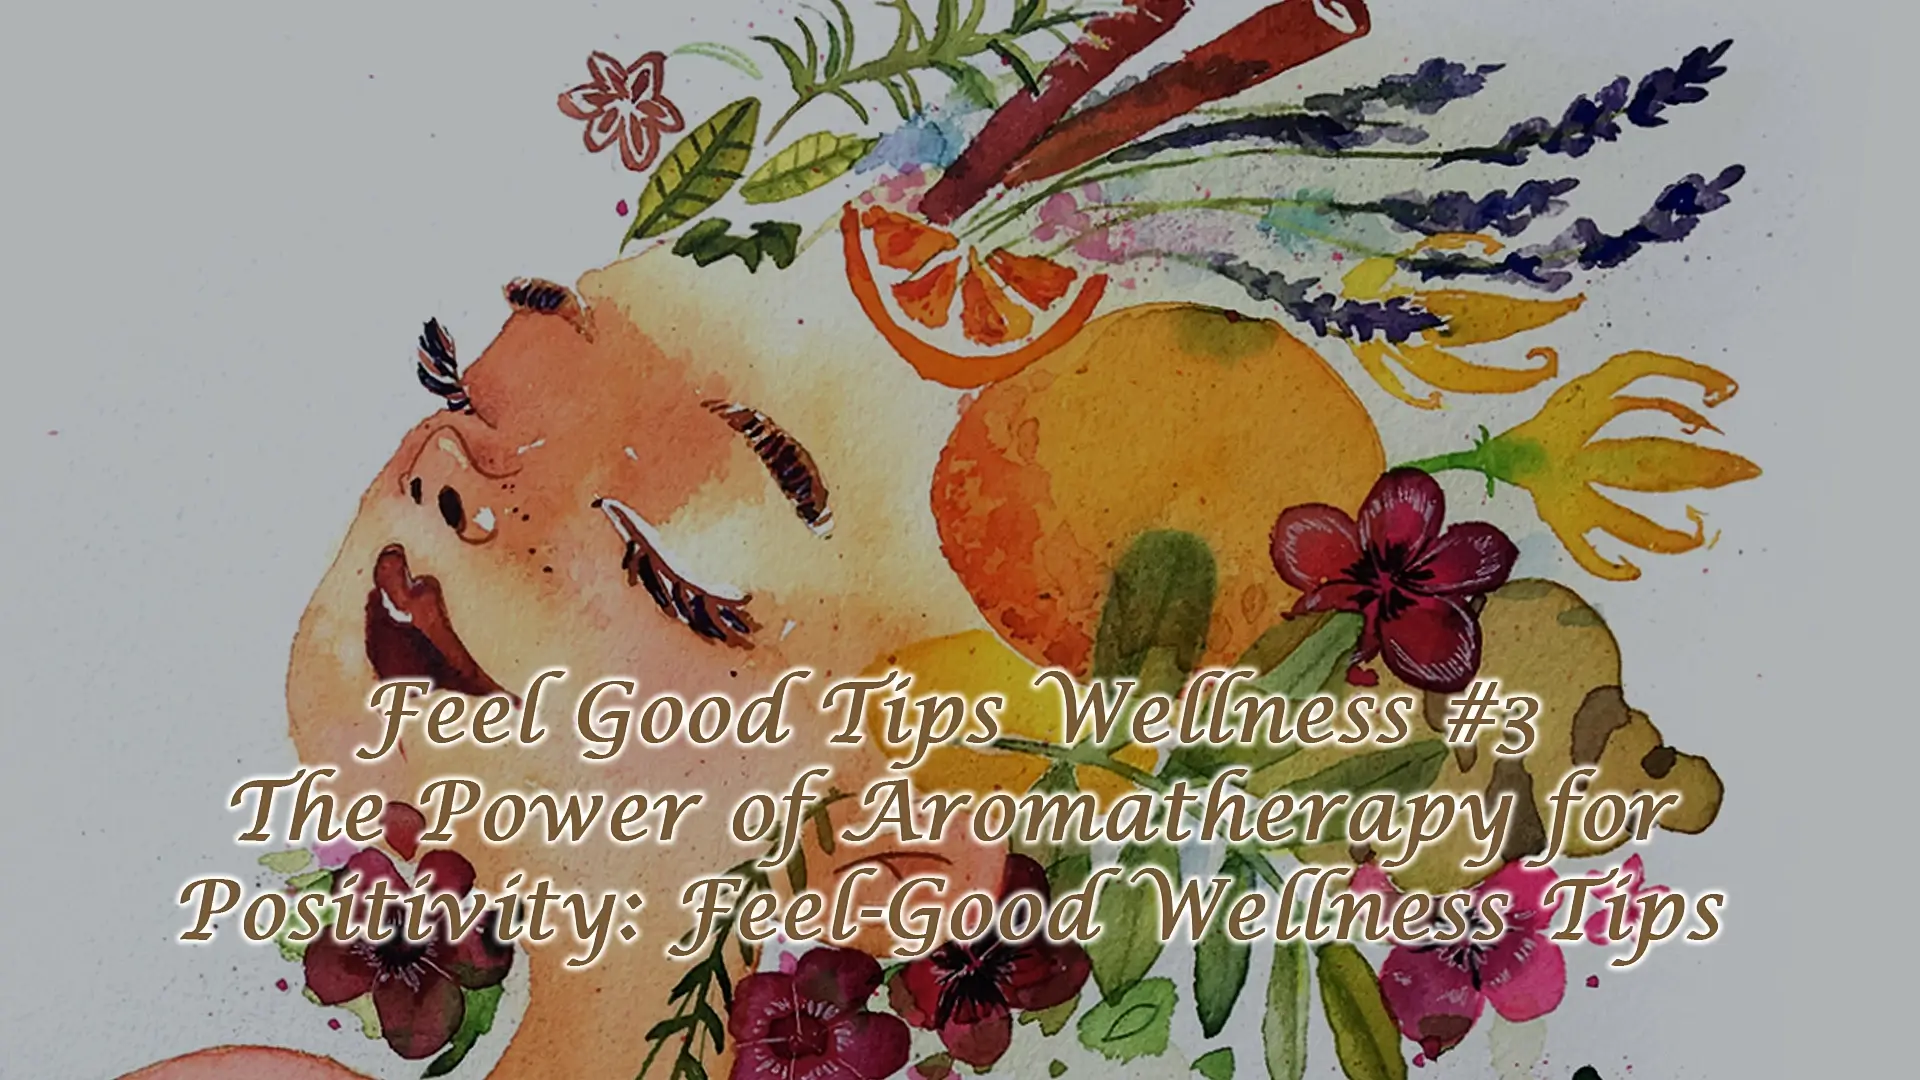 The Power of Aromatherapy for Positivity: Feel-Good Wellness Tips